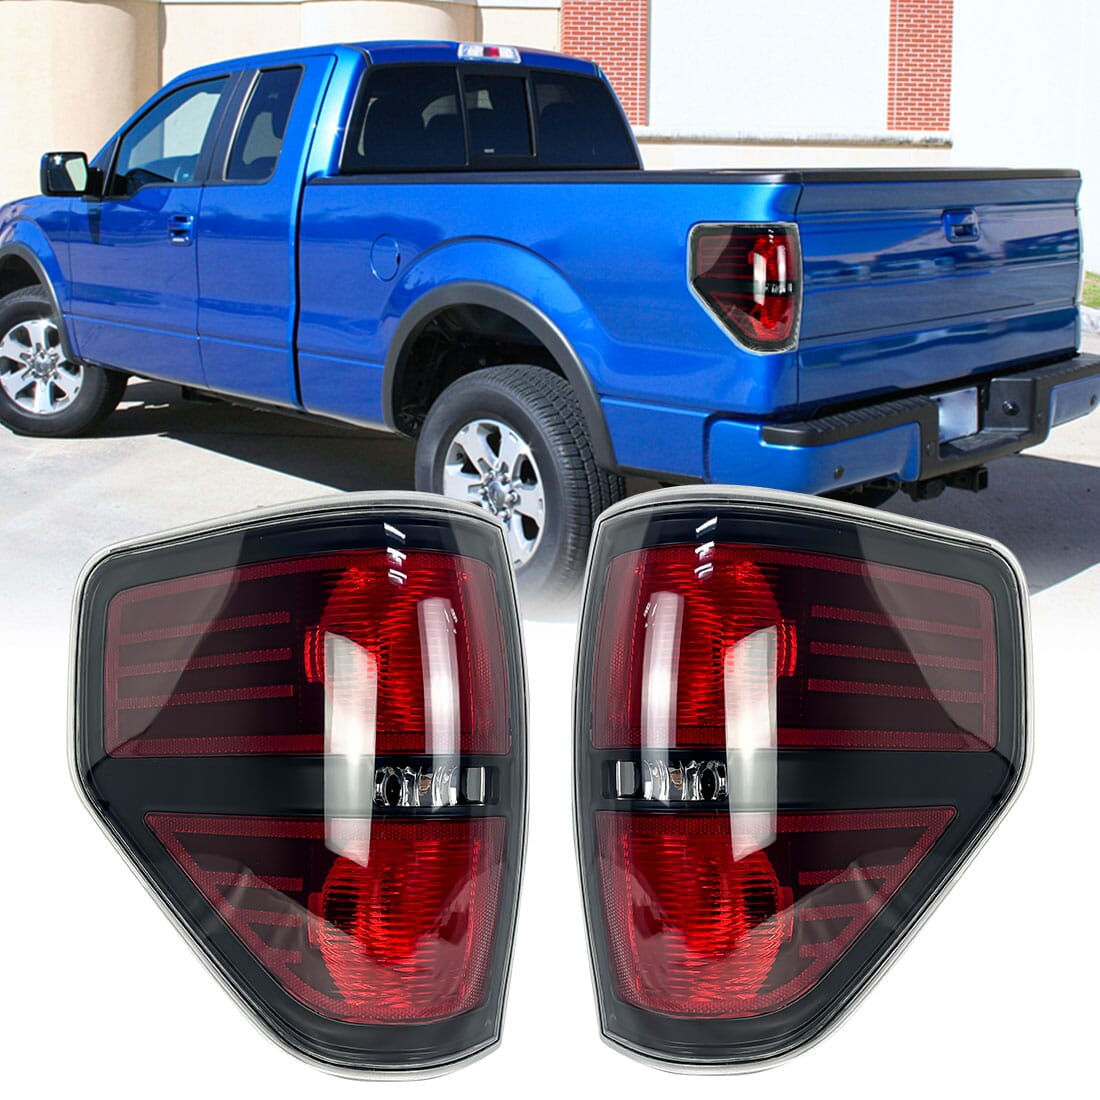 LED Tail Lights Brake Lamps Assembly-Black Housing without light bulbs